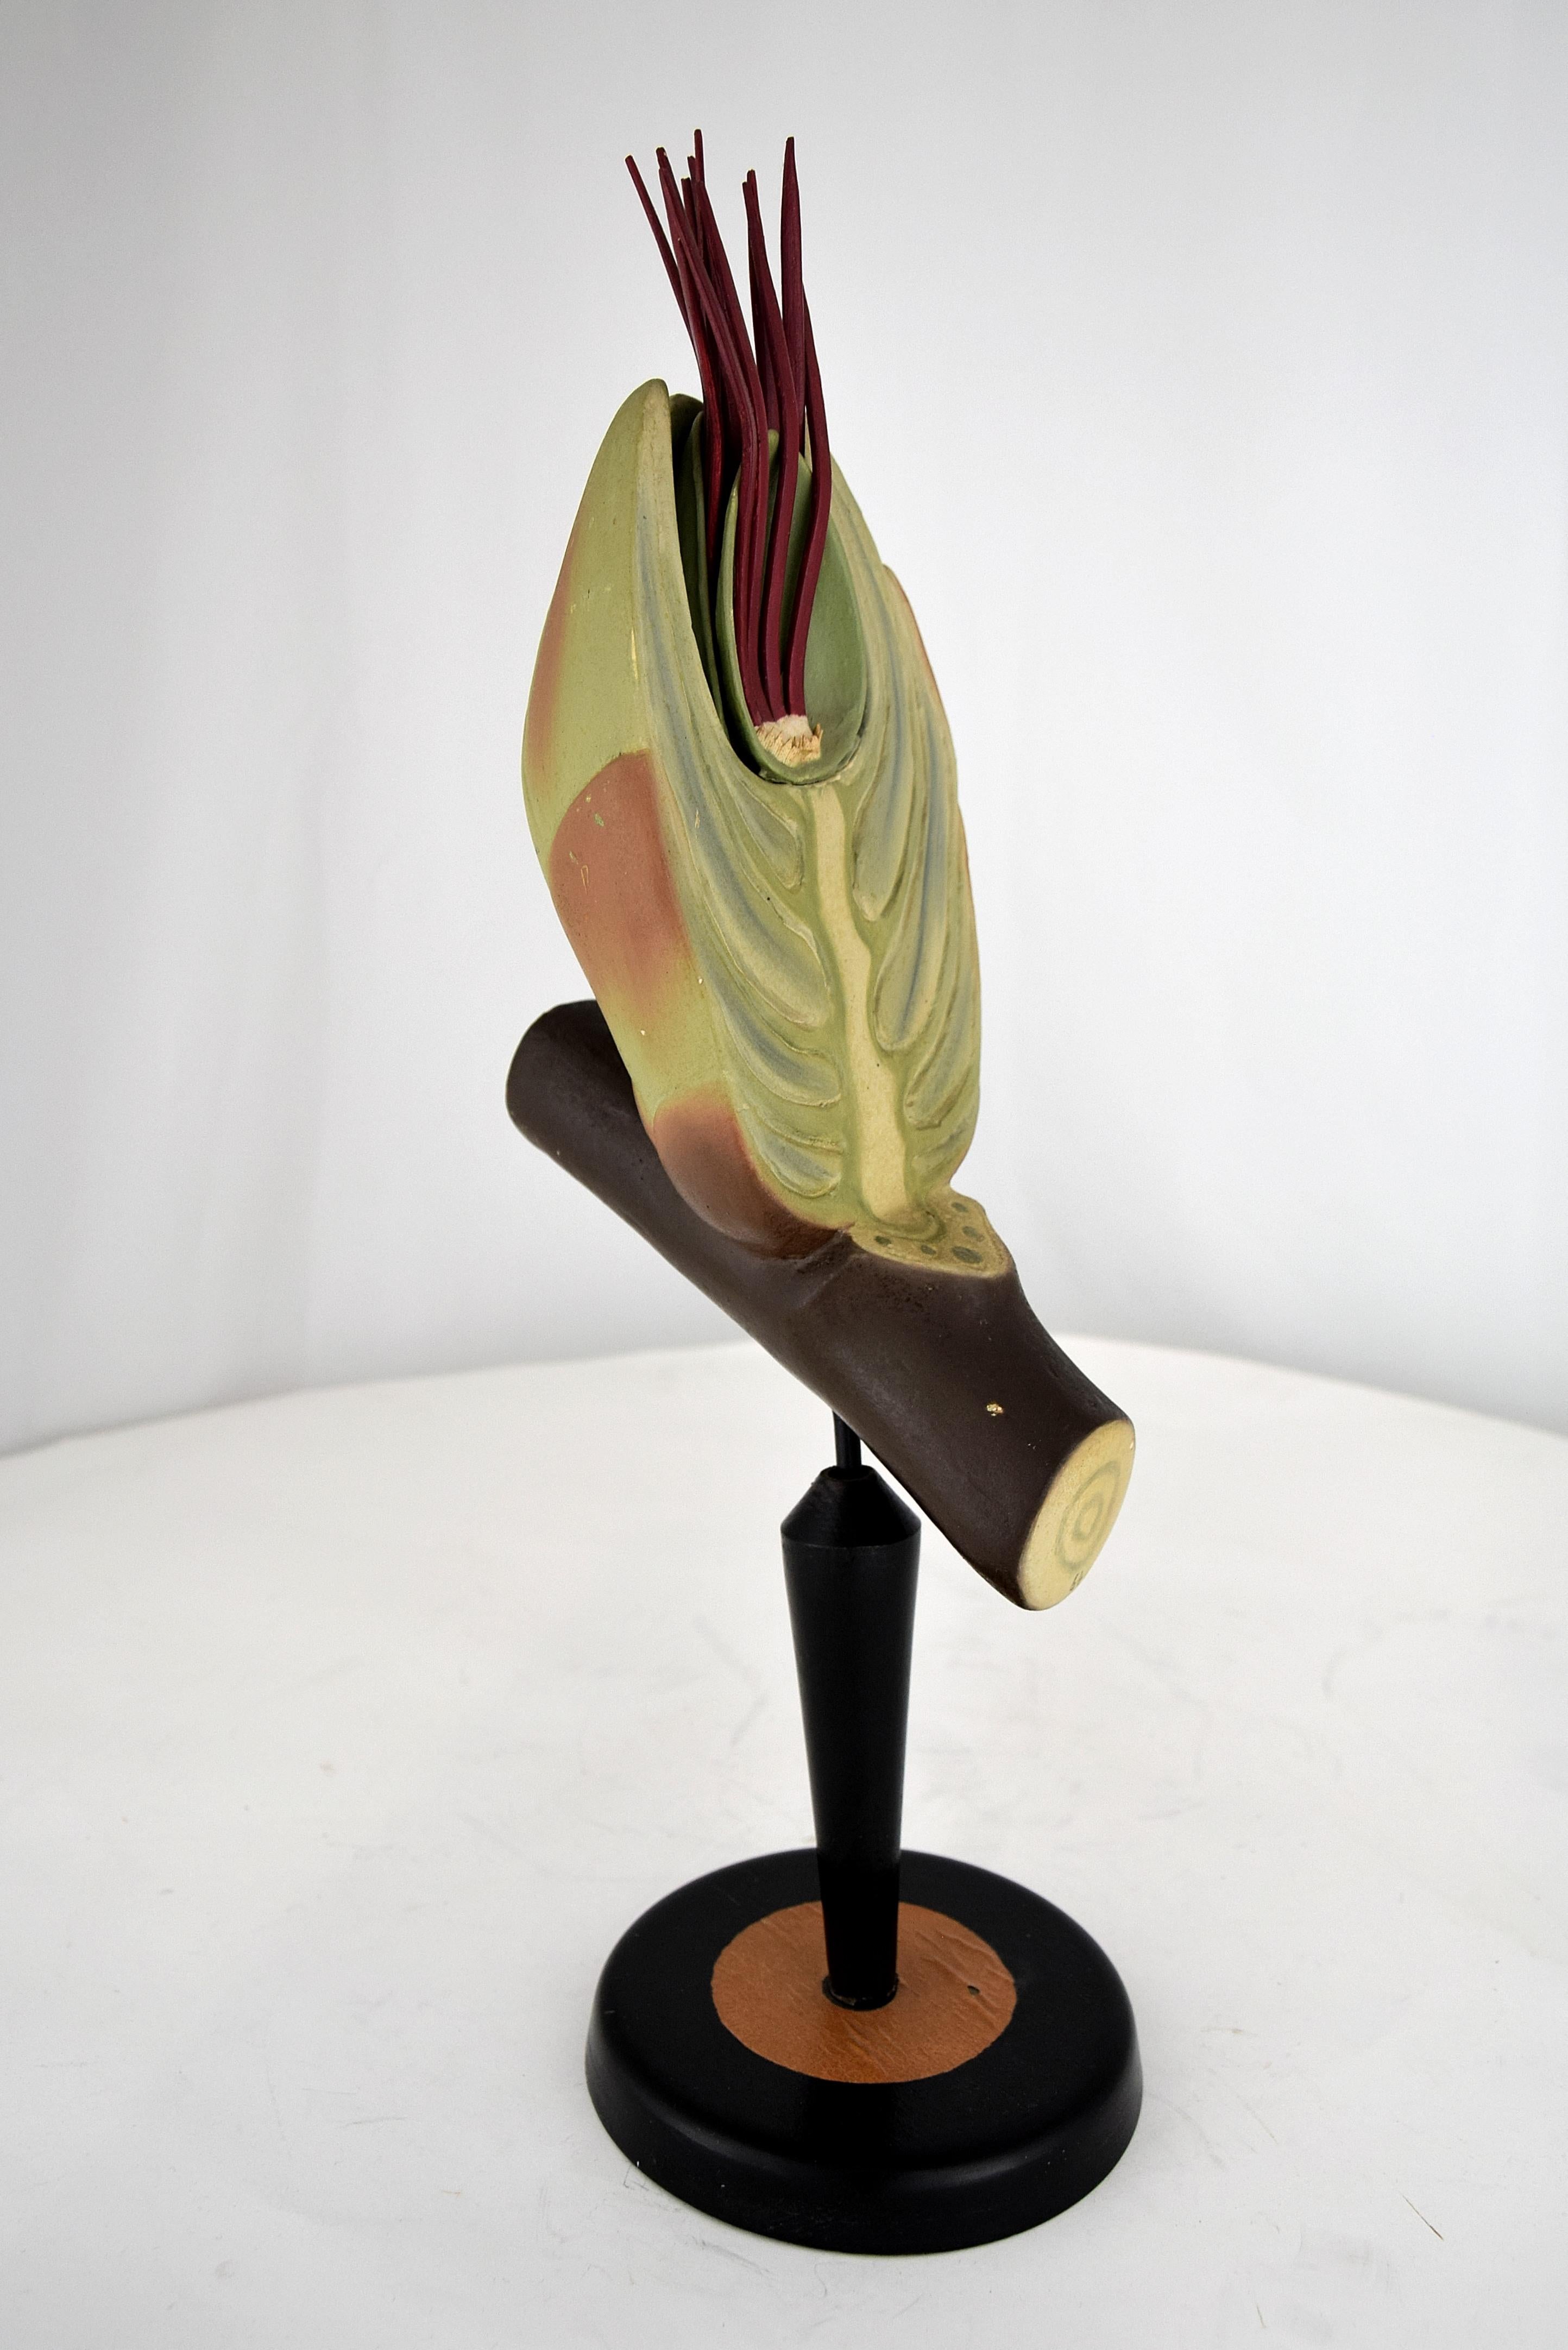 Beautiful Mid-Century Modern hand painted ceramic intersection of a blooming Hazelnut, Corylus Avellana. This rare sculptural piece is in great condition as can be seen in the images. Made in Leipzig, German Democratic Republic, East Germany in the